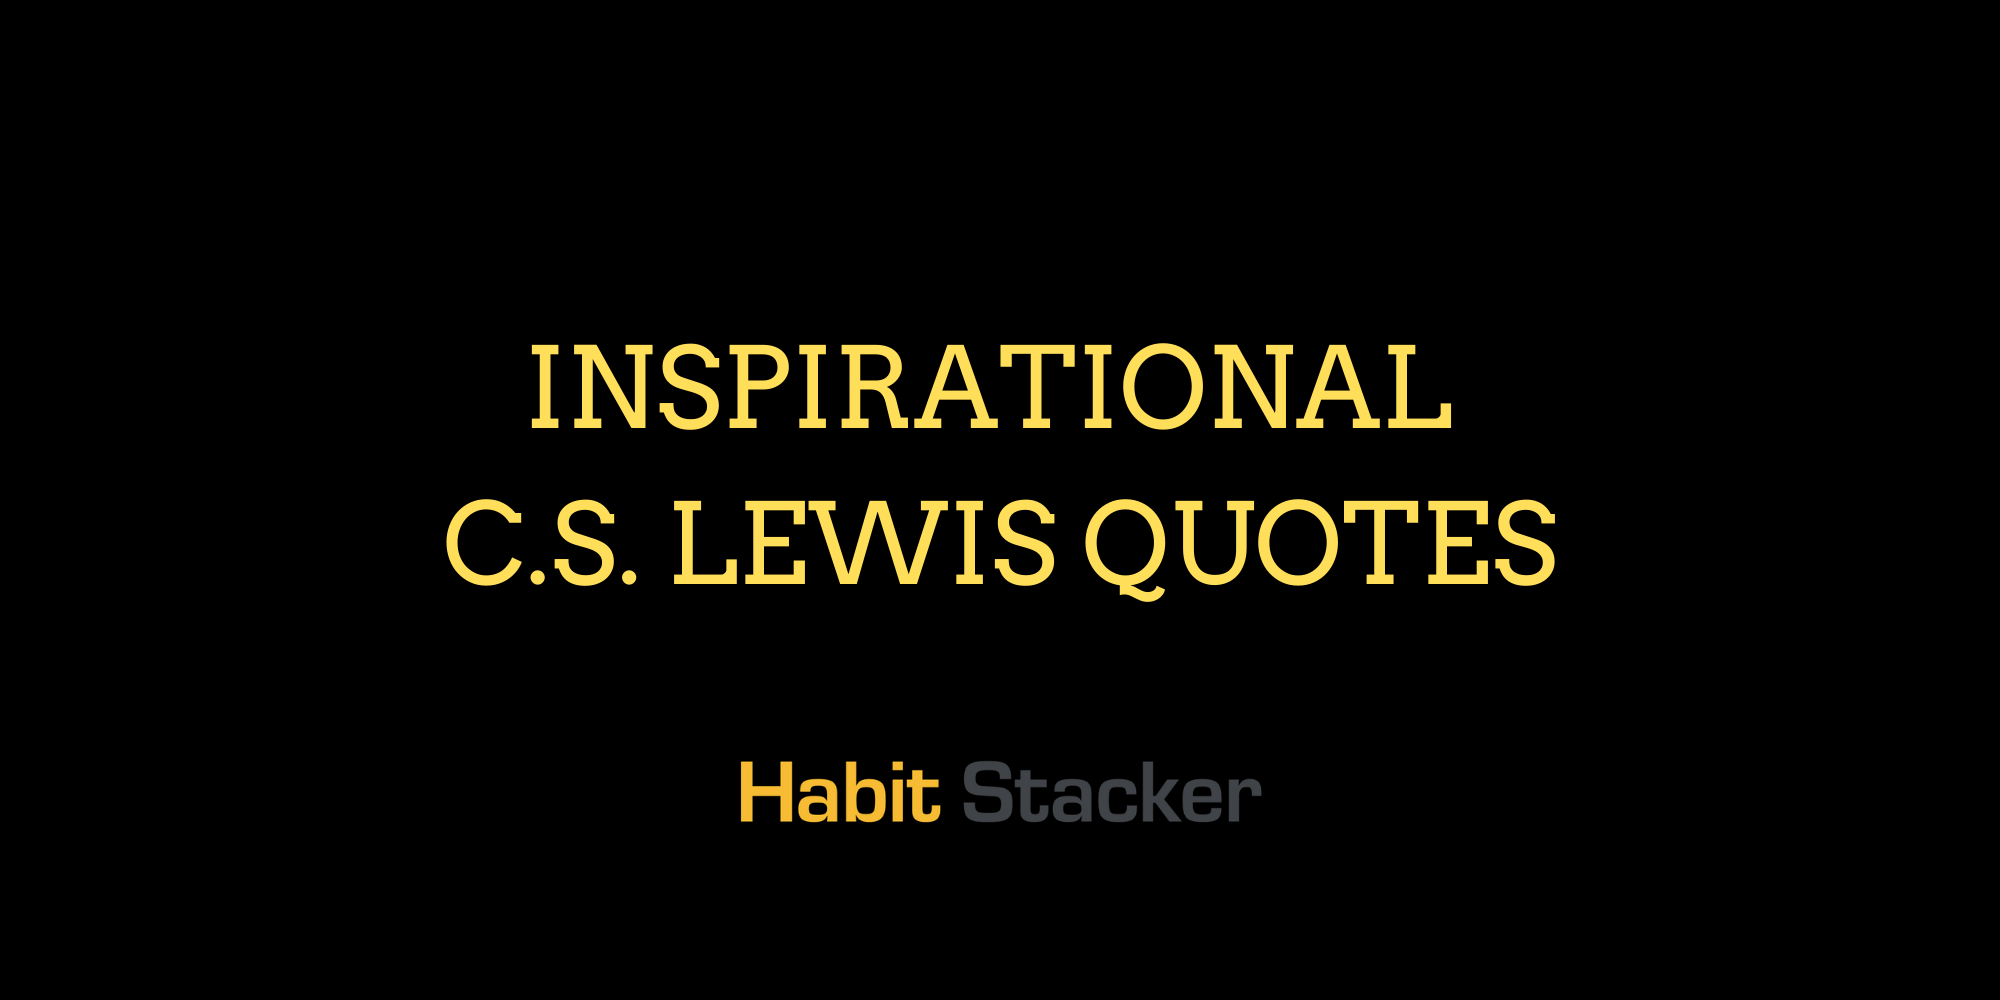 40 Inspirational C.S. Lewis Quotes to Make You Think - Habit Stacker